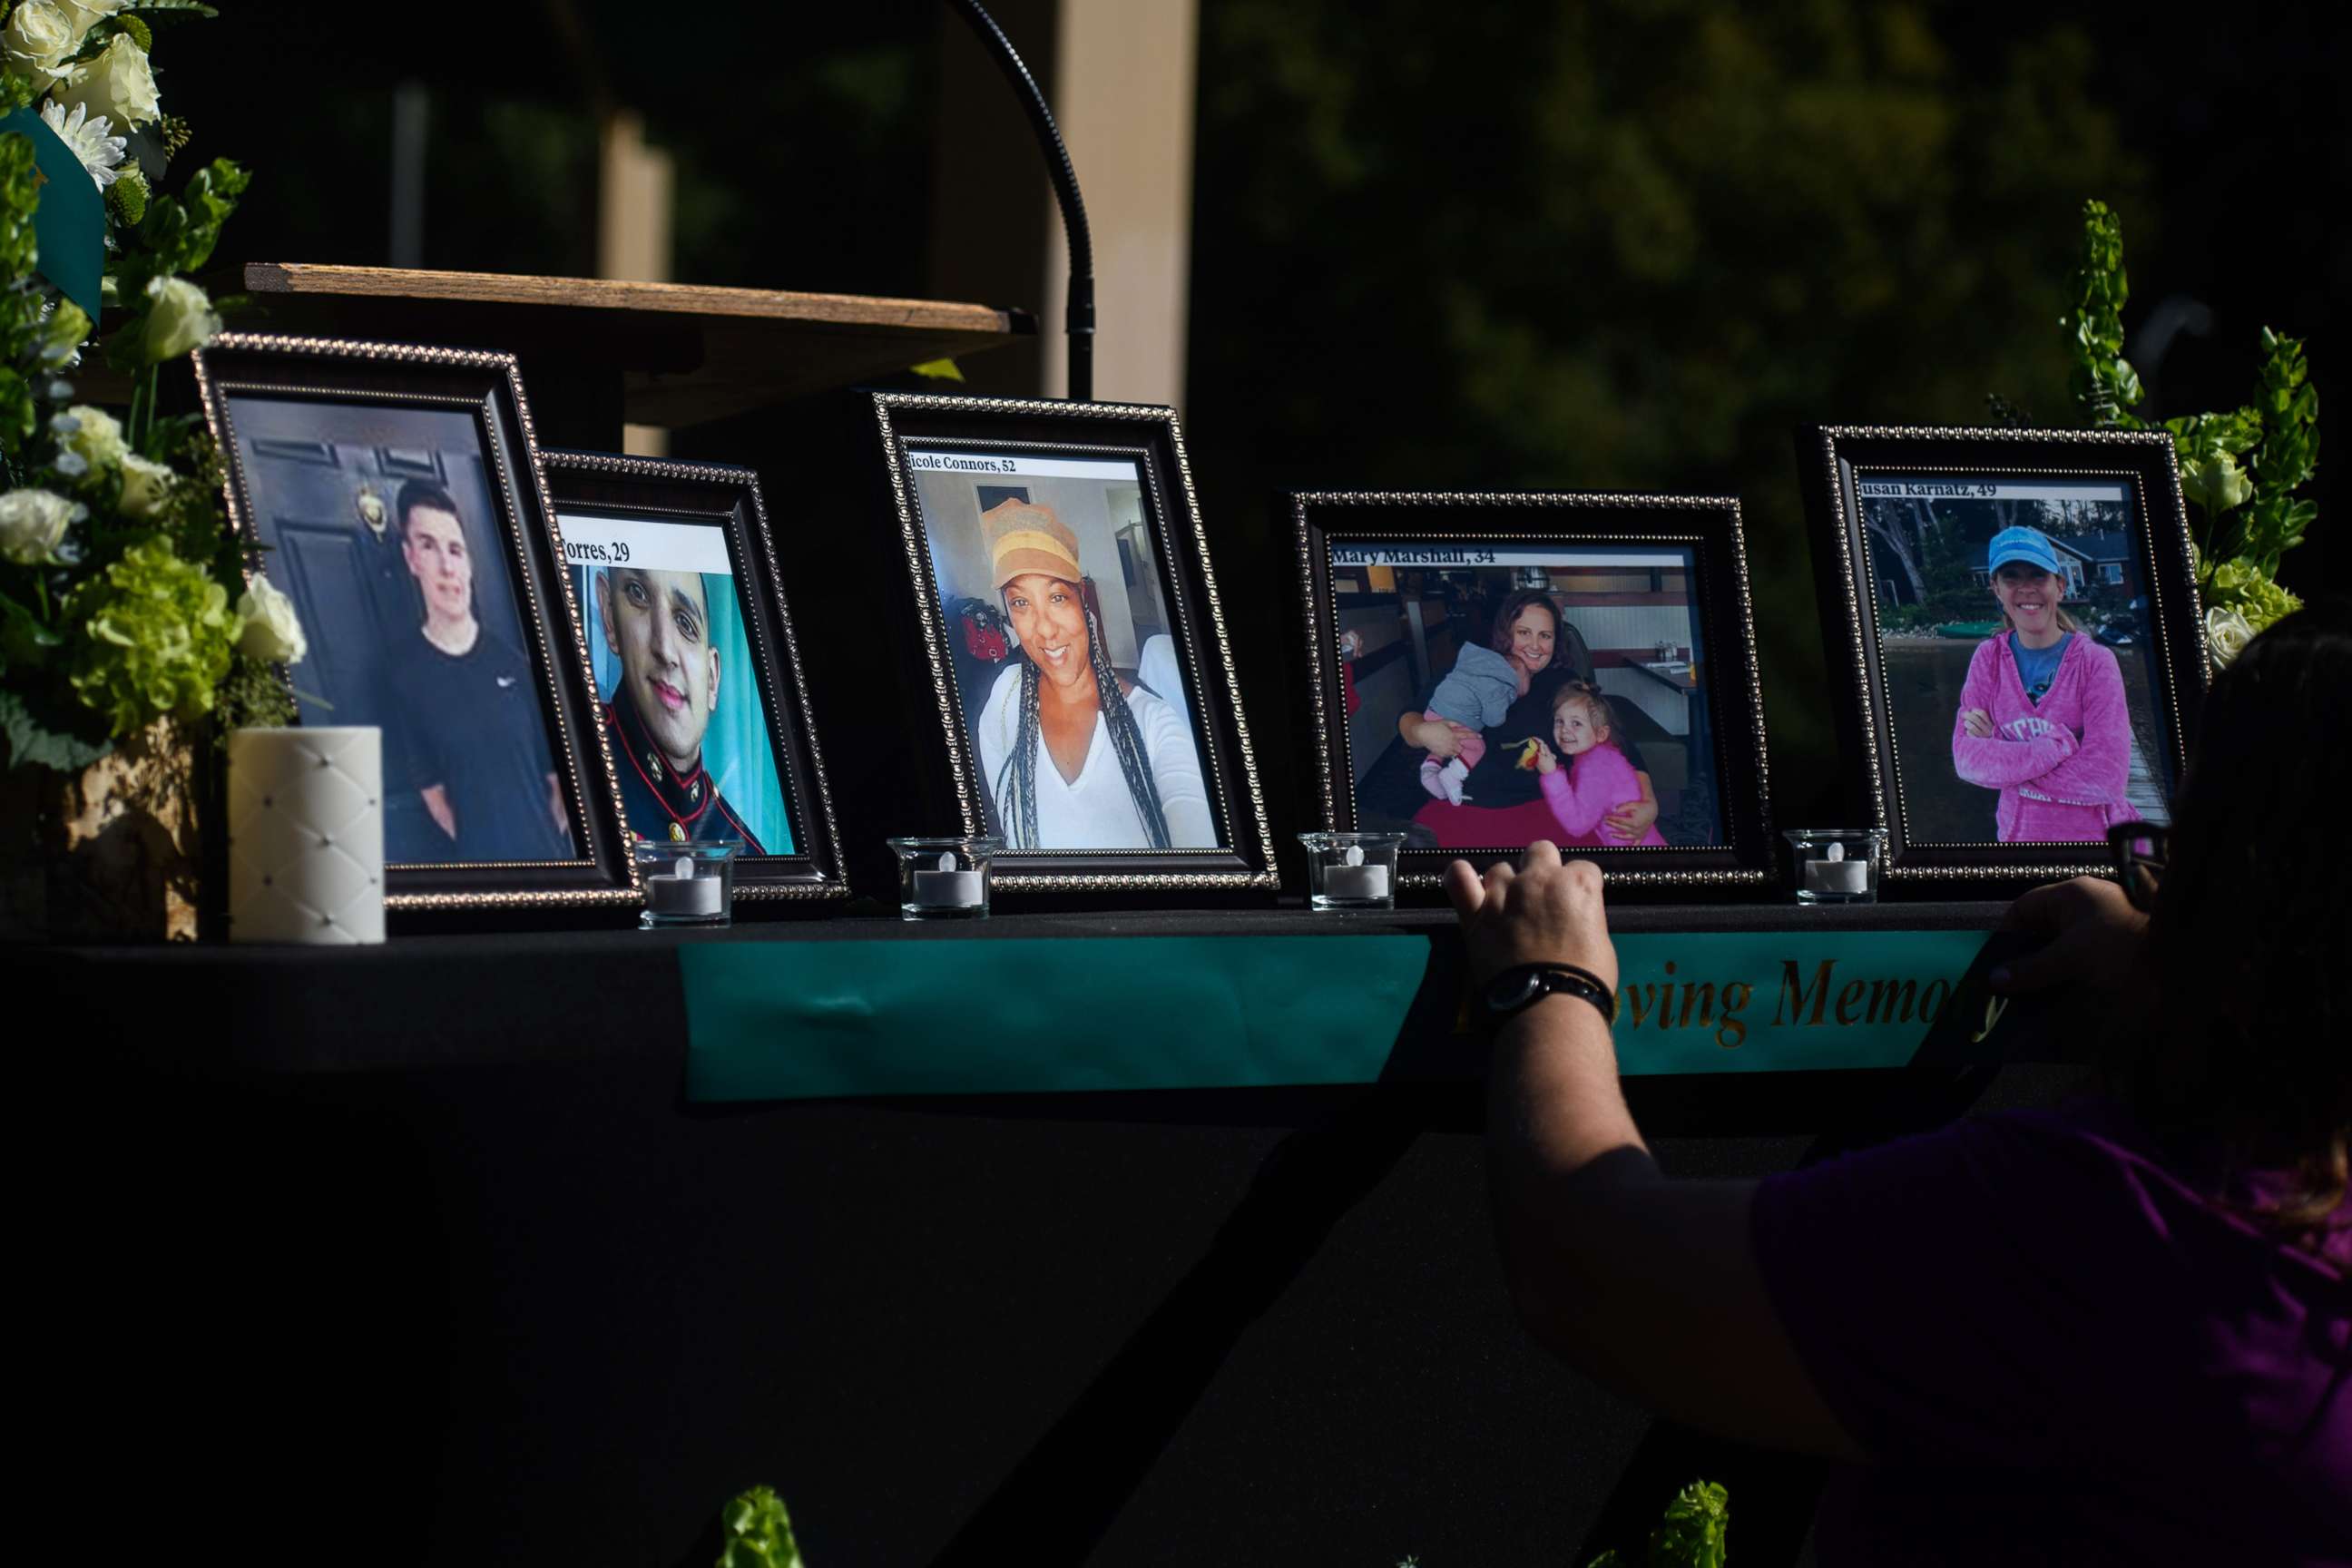 PHOTO: People set up a memorial table with images of the shooting victims for a vigil in the Hedingham neighborhood, Oct. 15, 2022, in Raleigh, N.C.